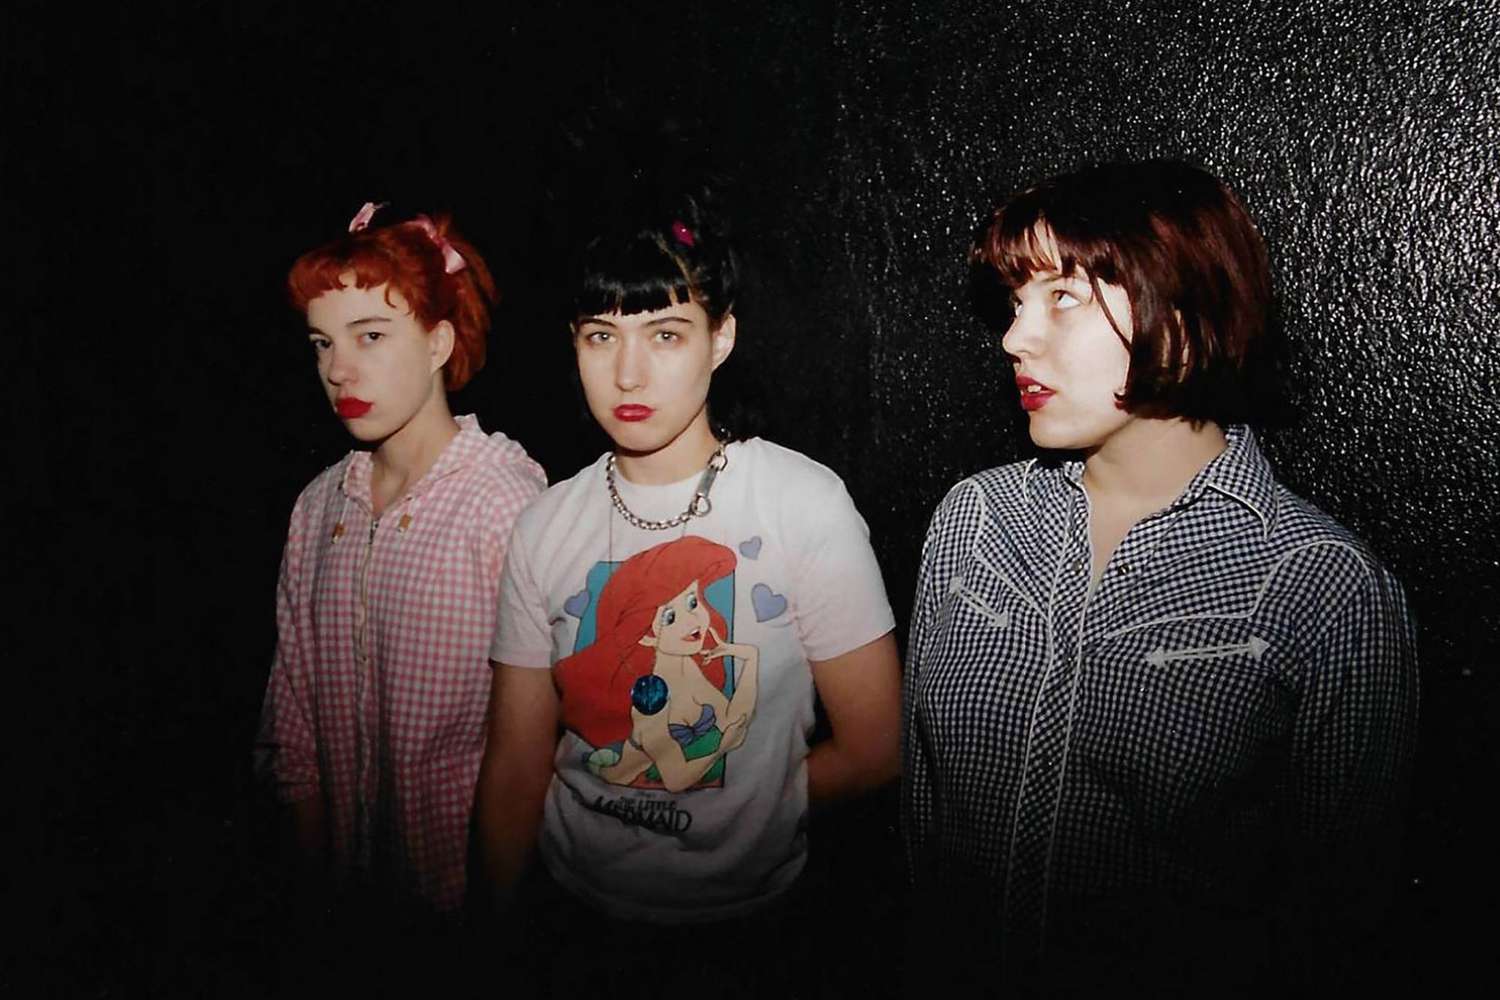 patrice forfremmelse Fødested Bikini Kill reunion: Lauren Mayberry, Donita Sparks on band's legacy |  EW.com